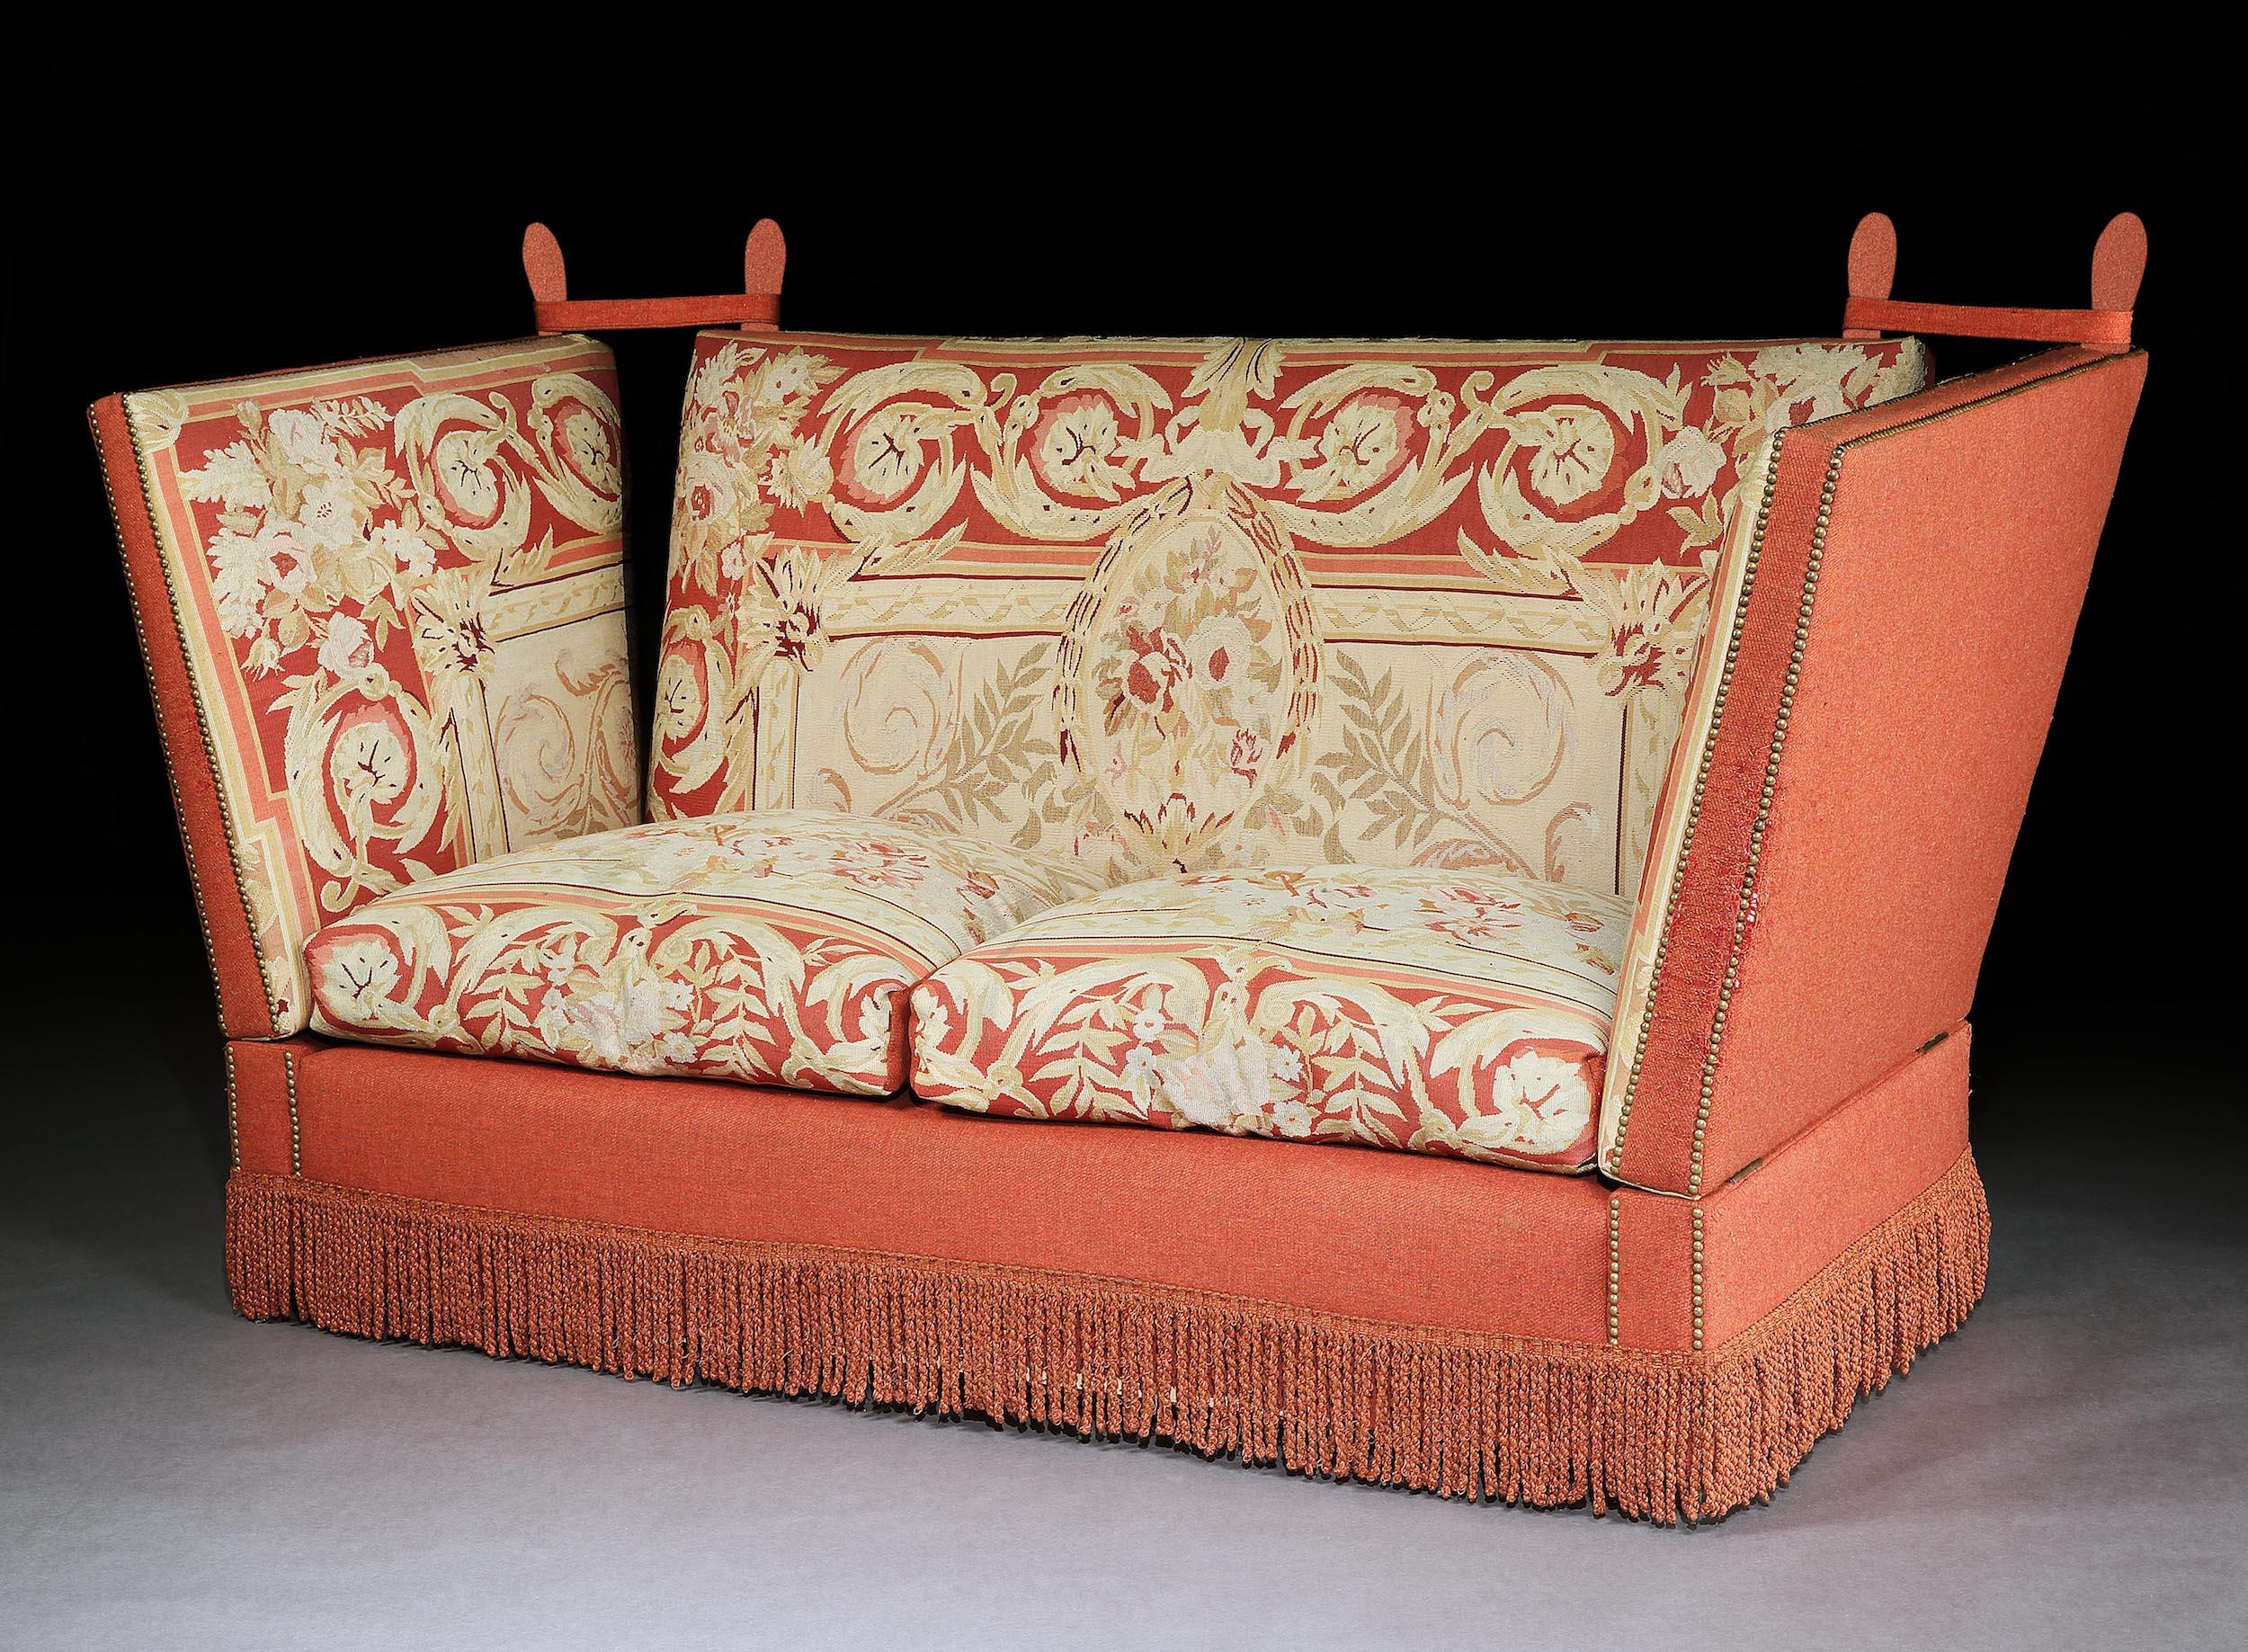 This settee exudes the Victorian country house style. It is unusual to be upholstered in Aubusson tapestry which is striking and gives it gravitas. It is very comfortable and designed for ultimate relaxation and draught-free protection.

The